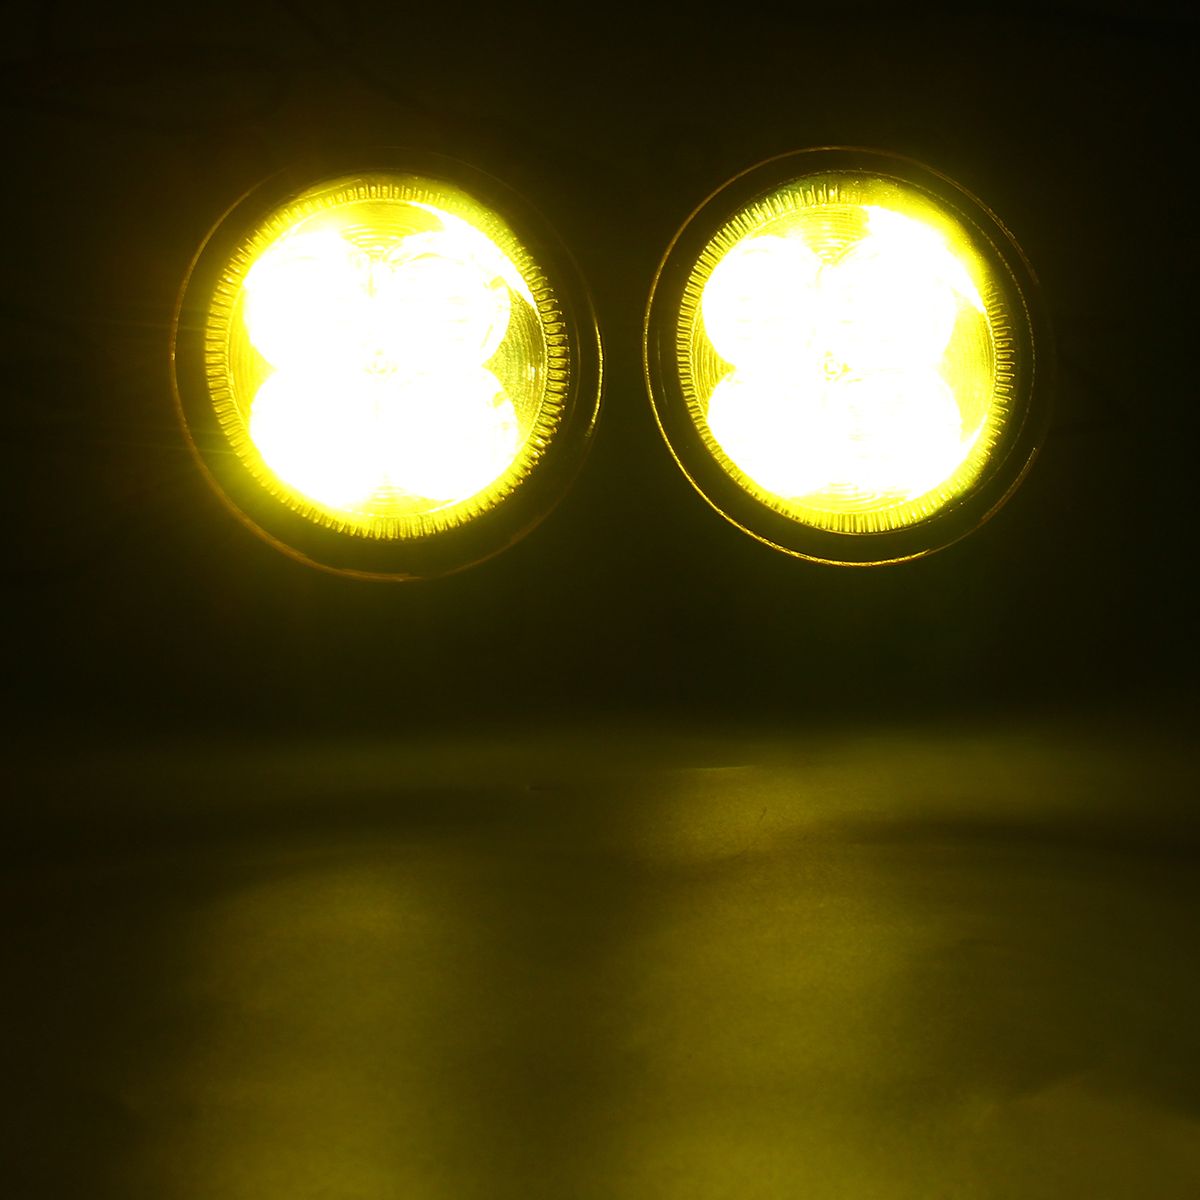 Pair-Car-Fog-Lights-Lamp-with-LED-Bulb-12W-Yellow-for-FordHondaAcuraNissanSuzuki-1364324